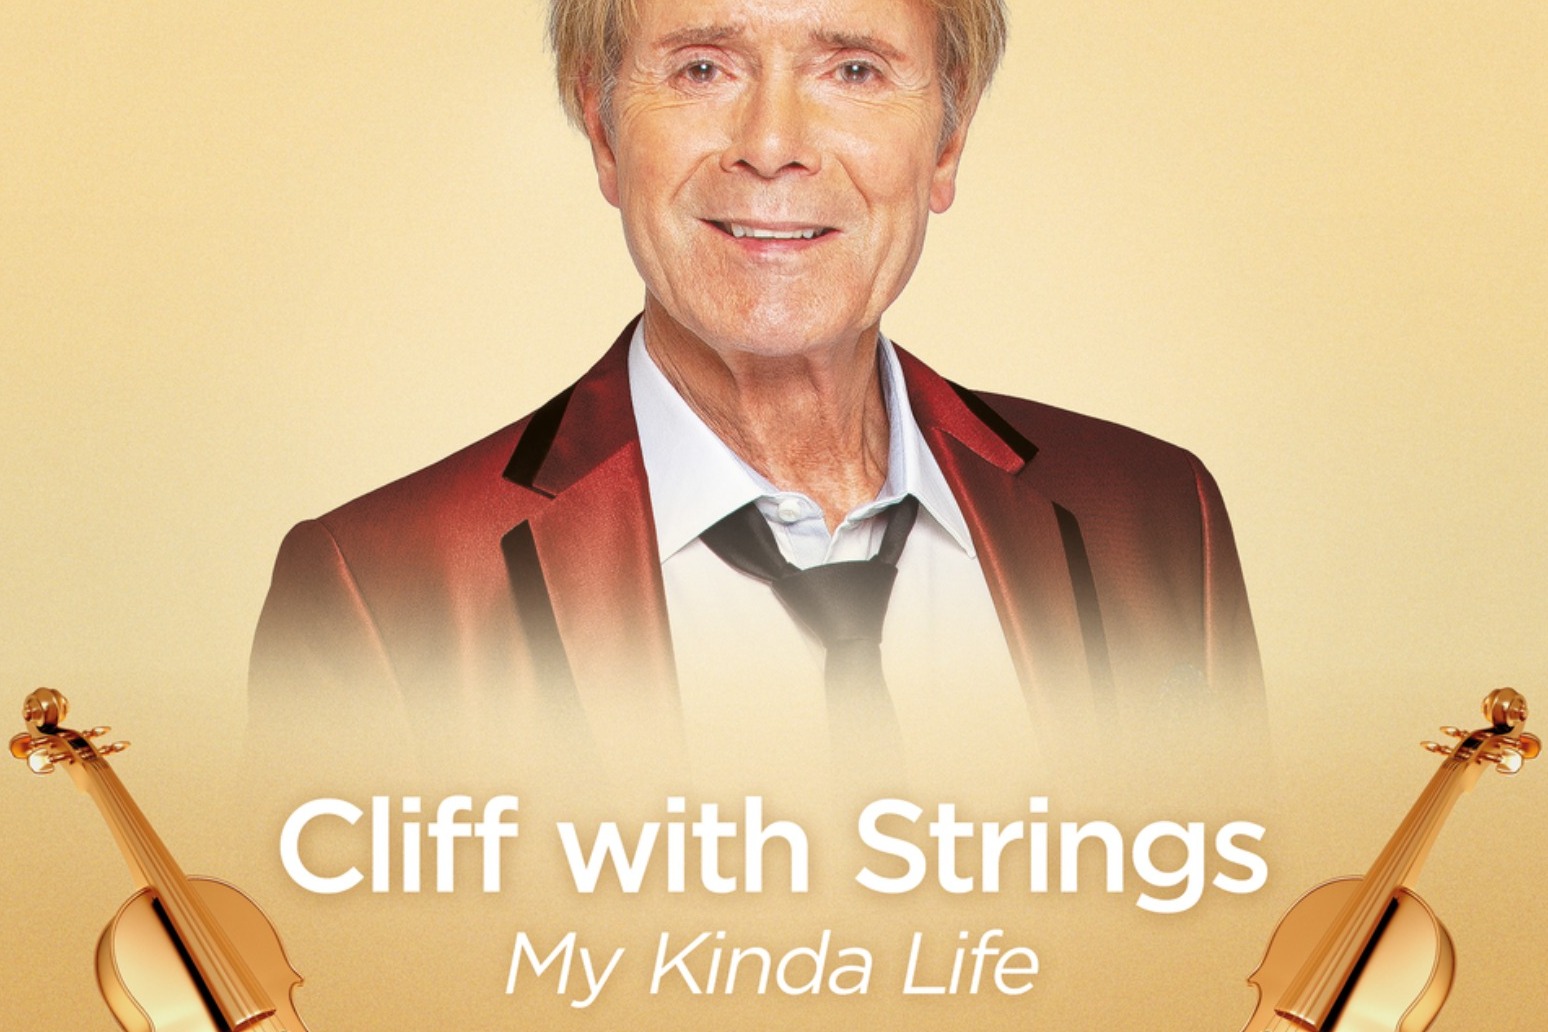 Sir Cliff Richard announces album celebrating 65 years in the music industry 